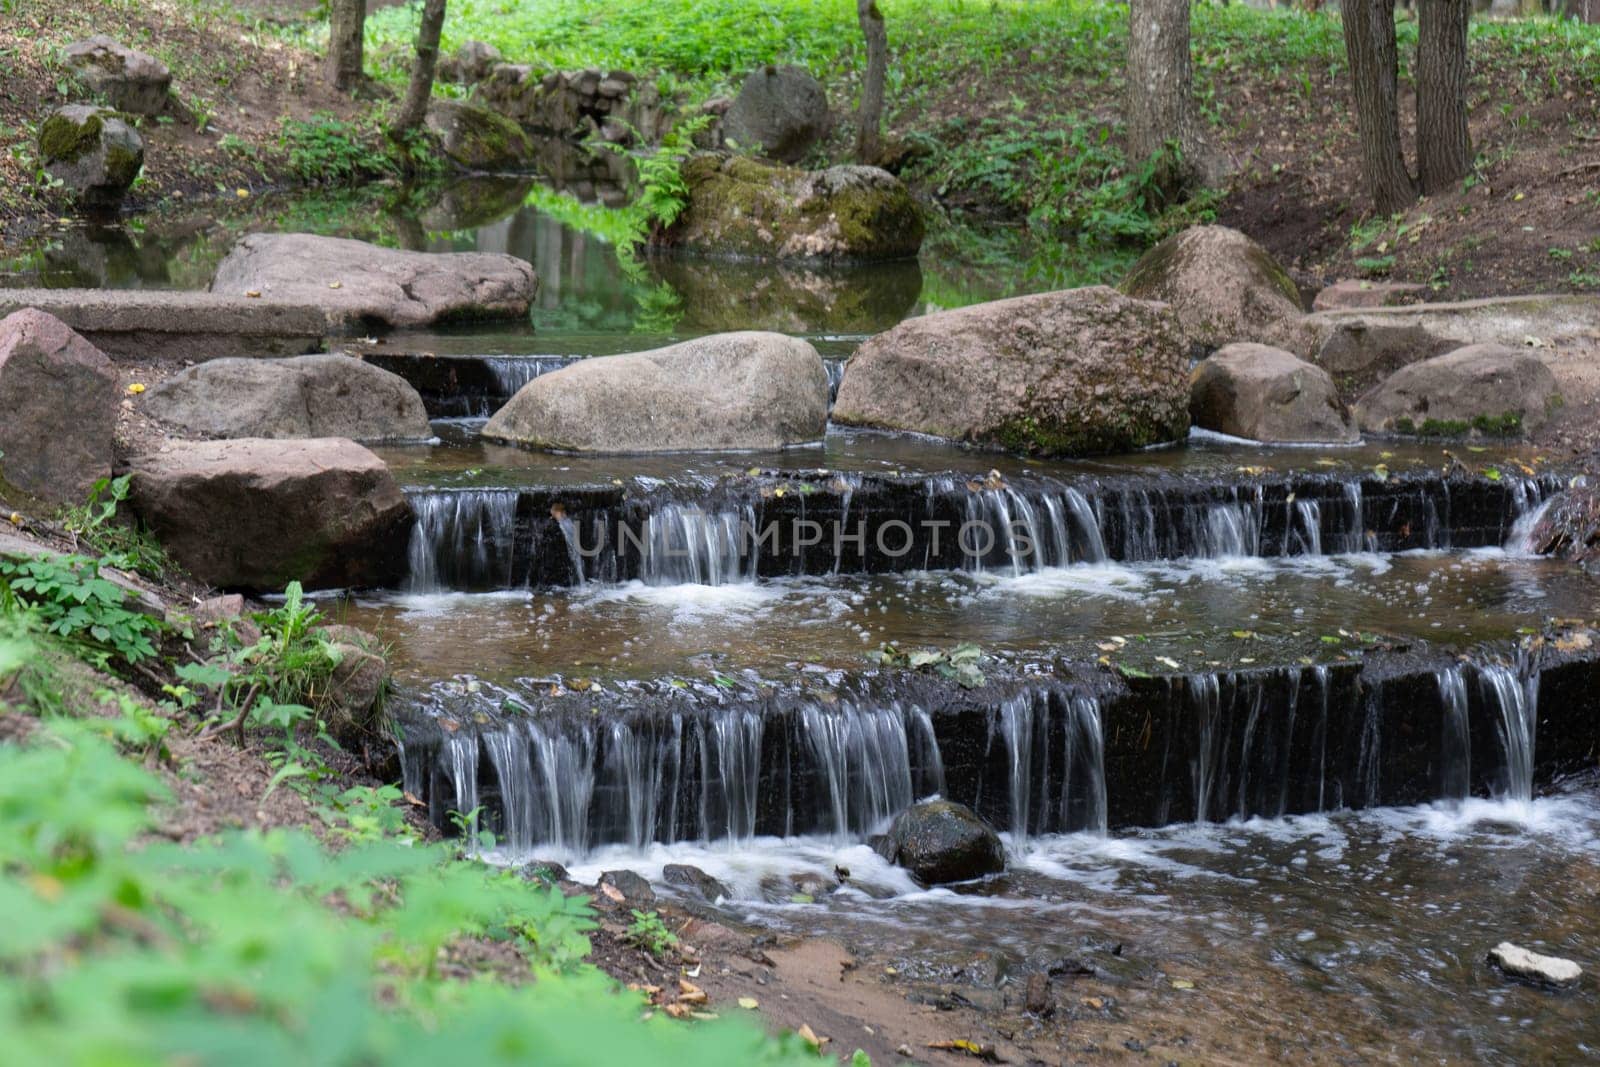 small artificial waterfall in the park.